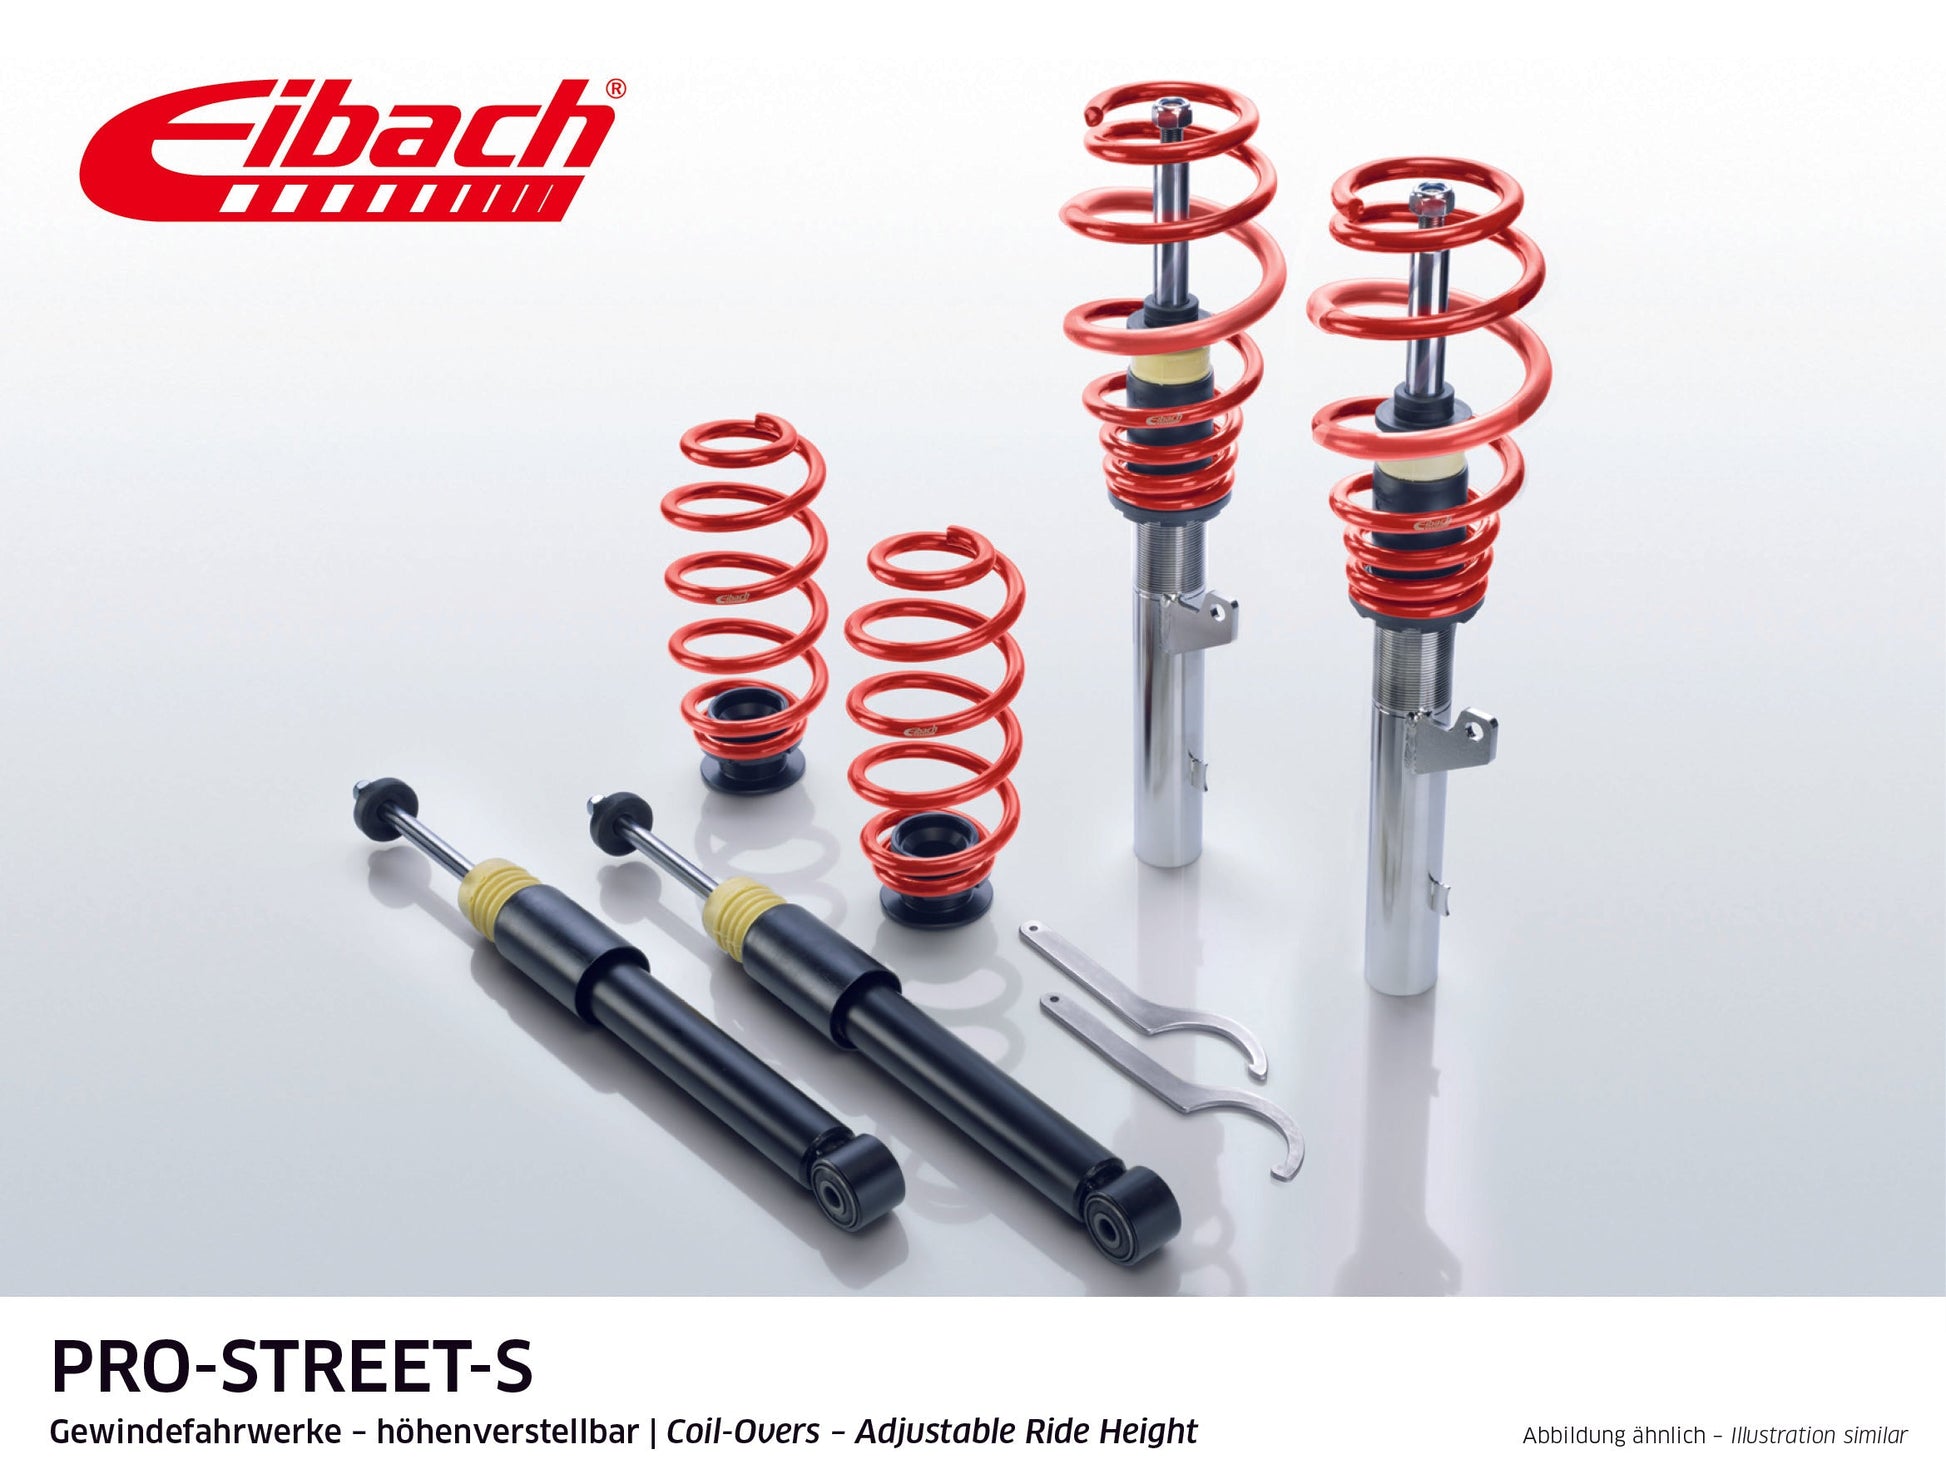 Eibach Pro-Street Coilover (PSS65-81-016-01-22) at £1231.81